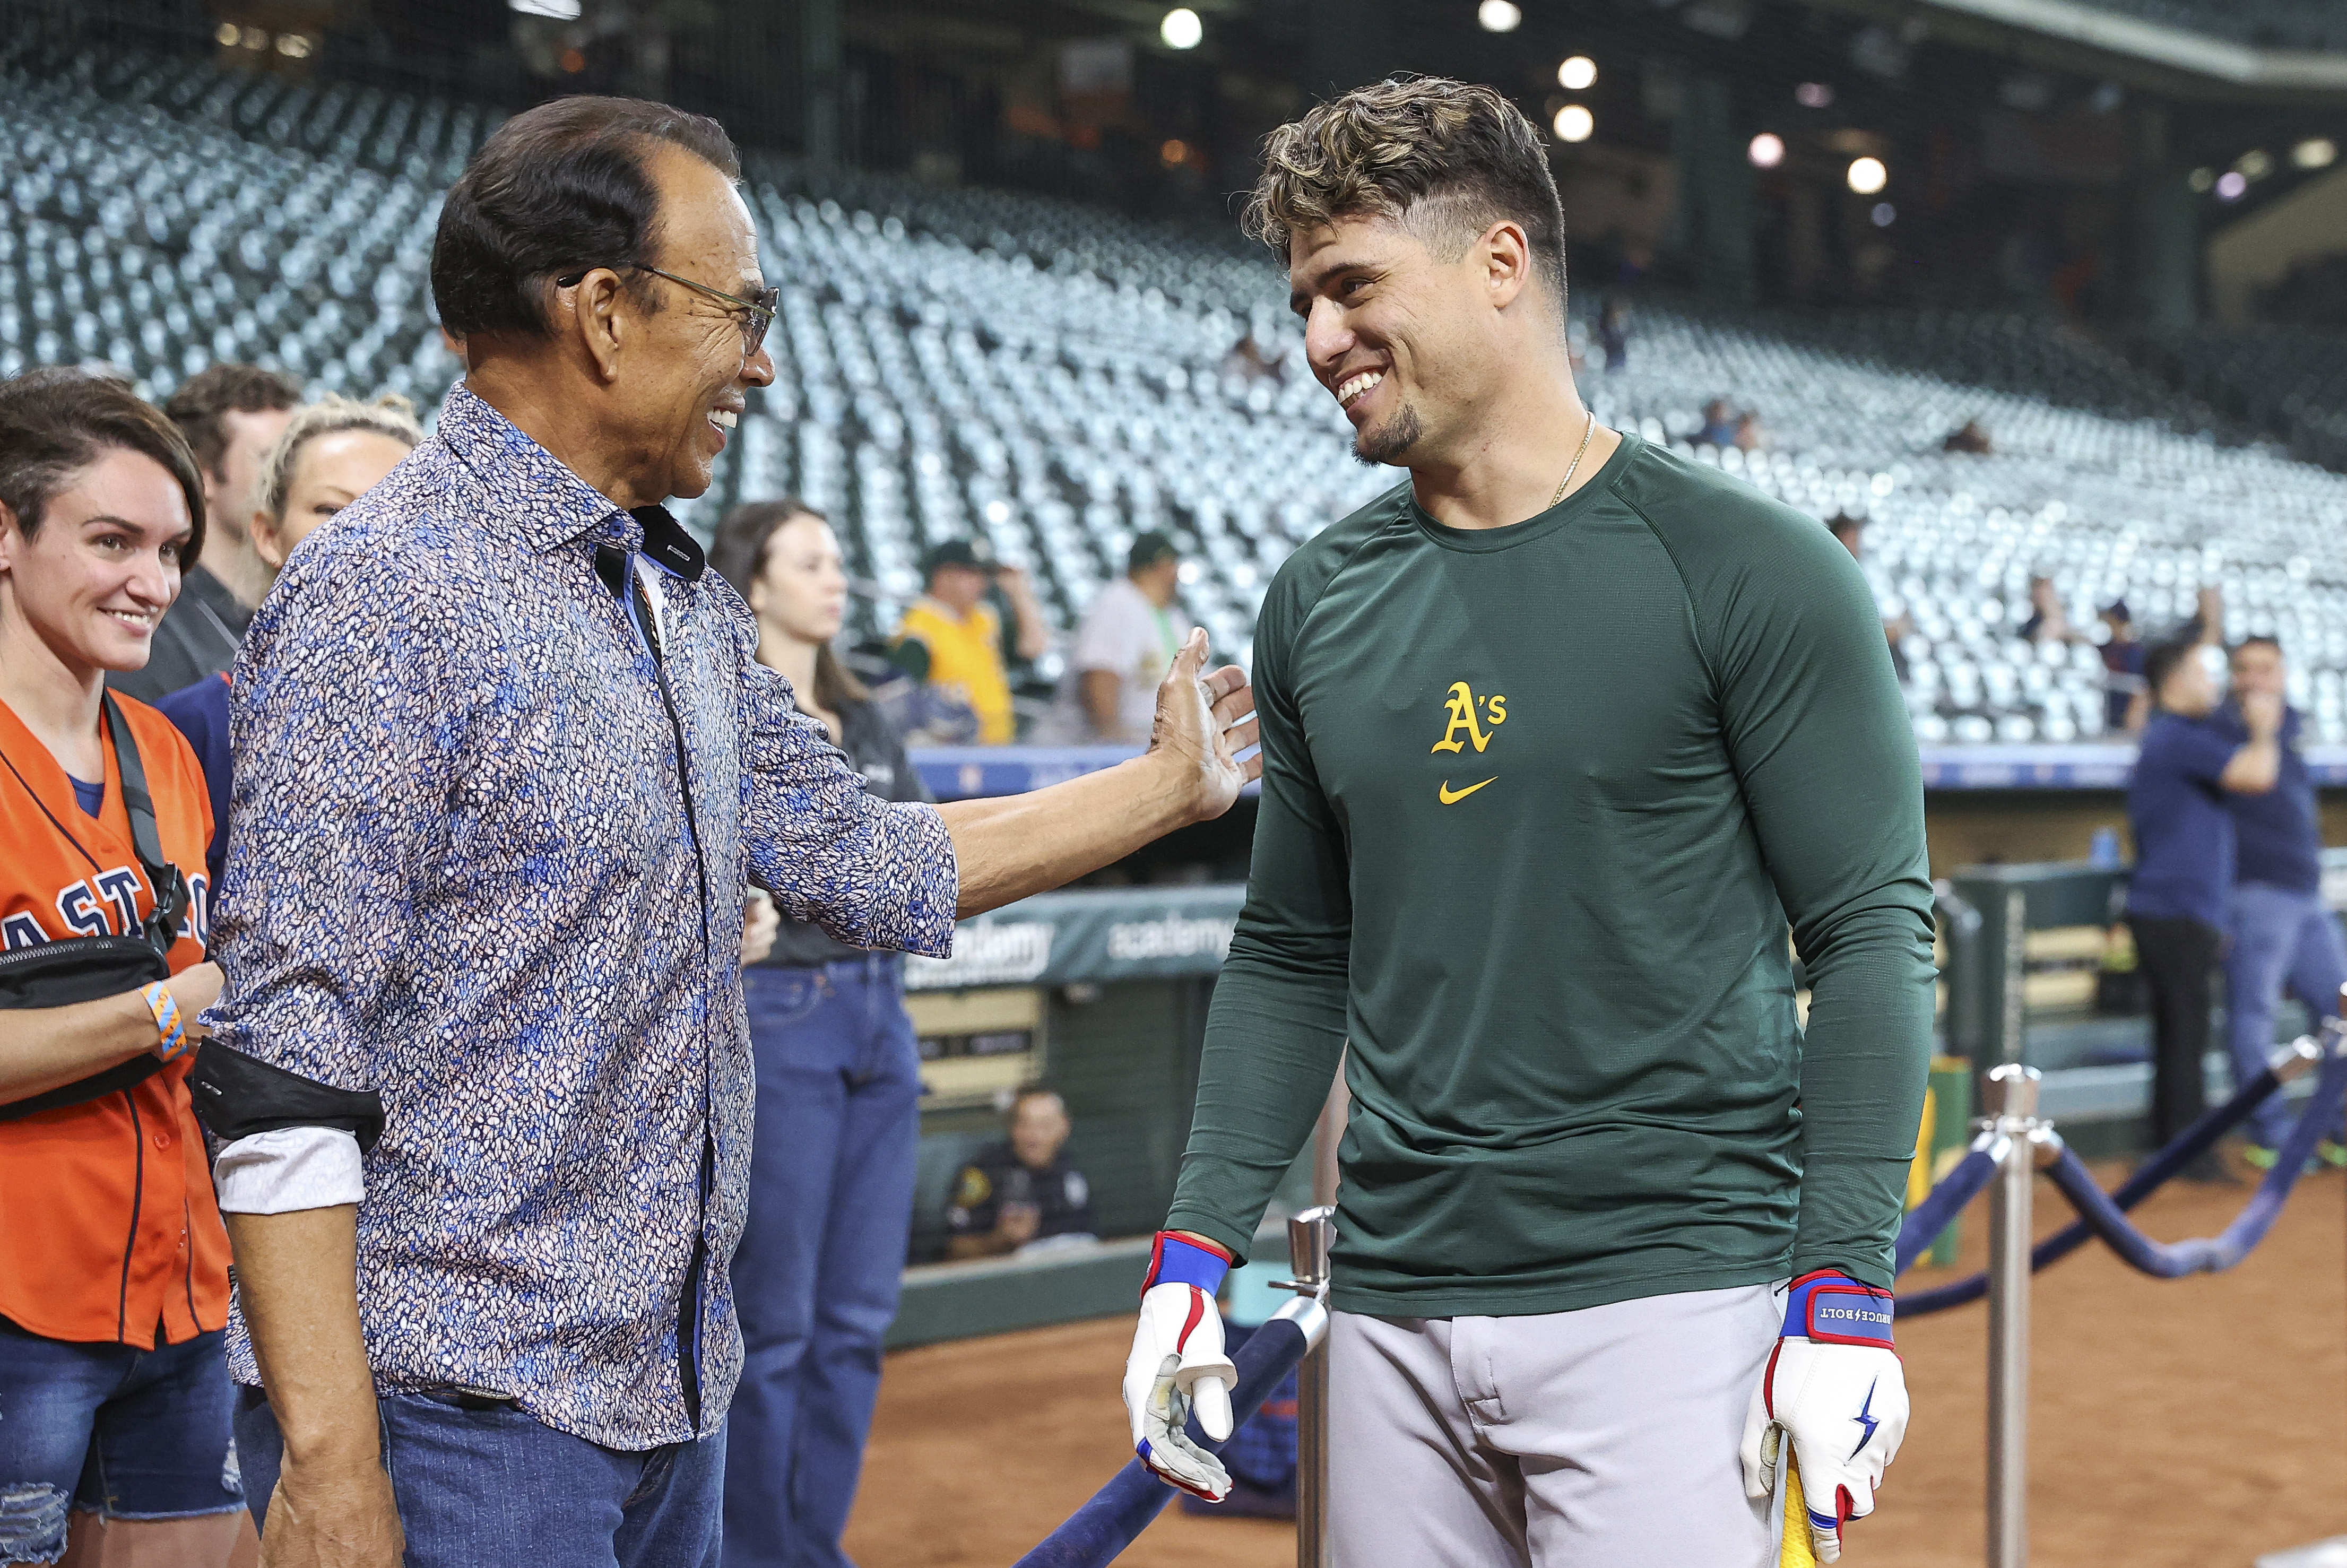 Fate of Oakland A's relocation rests in MLB hands